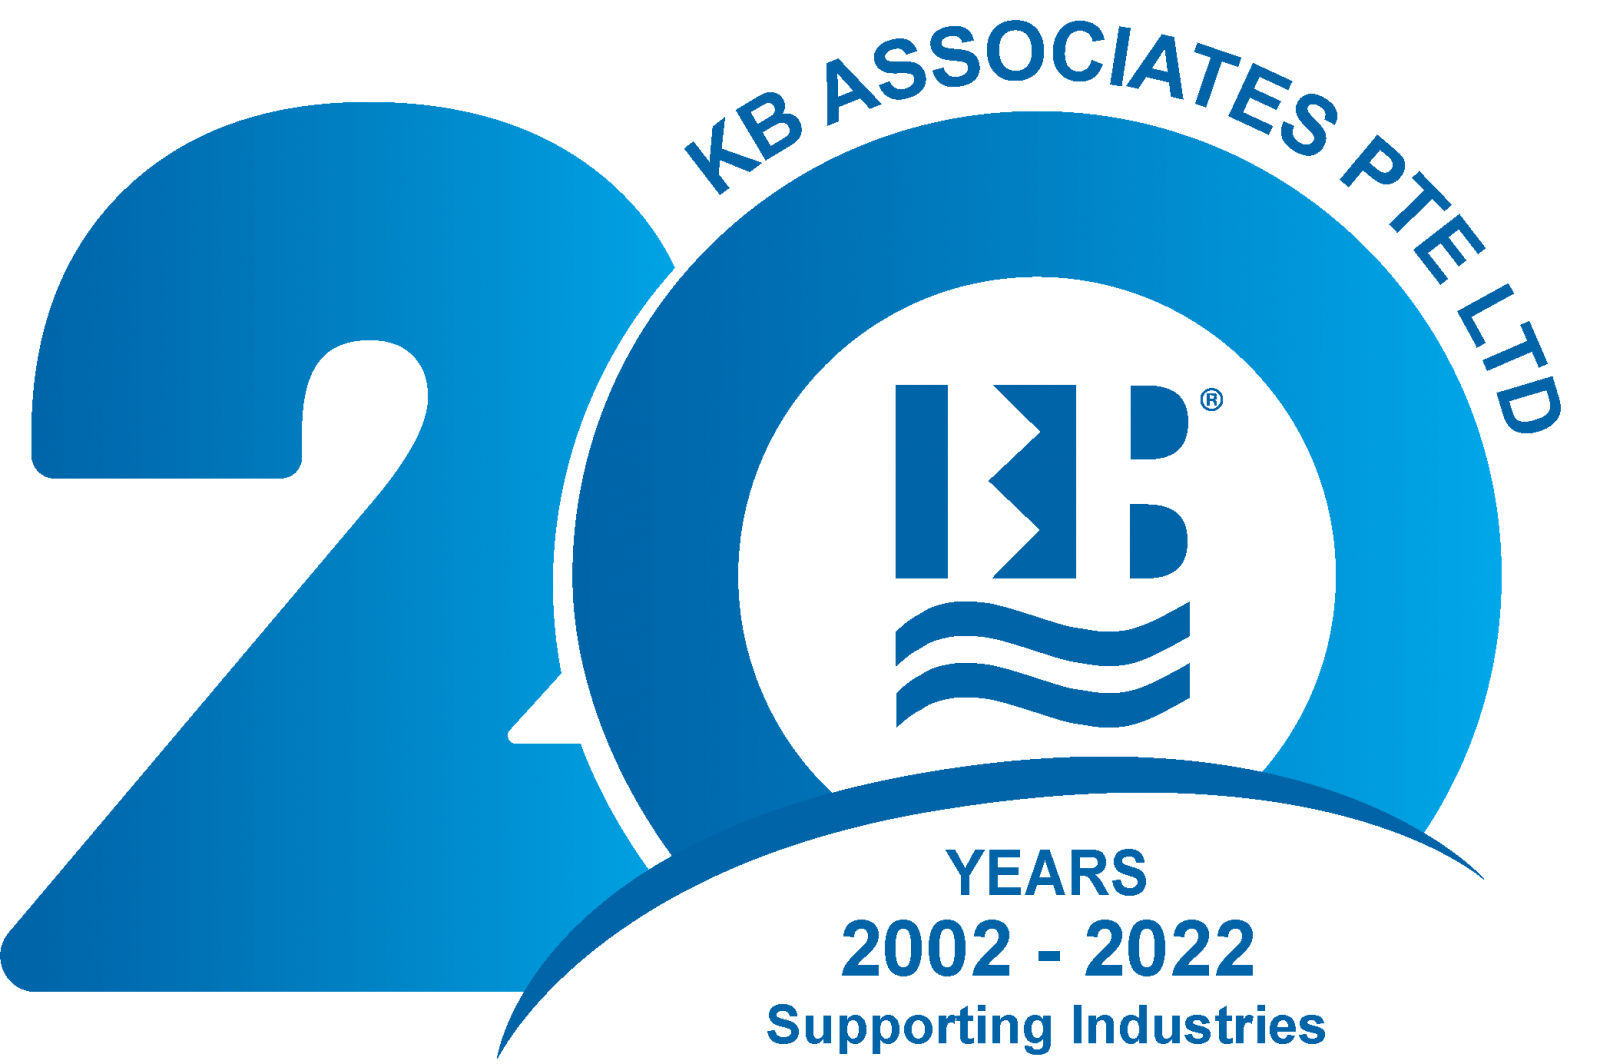 KB Associates Celebrates 20th Anniversary - Celebrating 20 Years in Providing Support to Companies and Industries